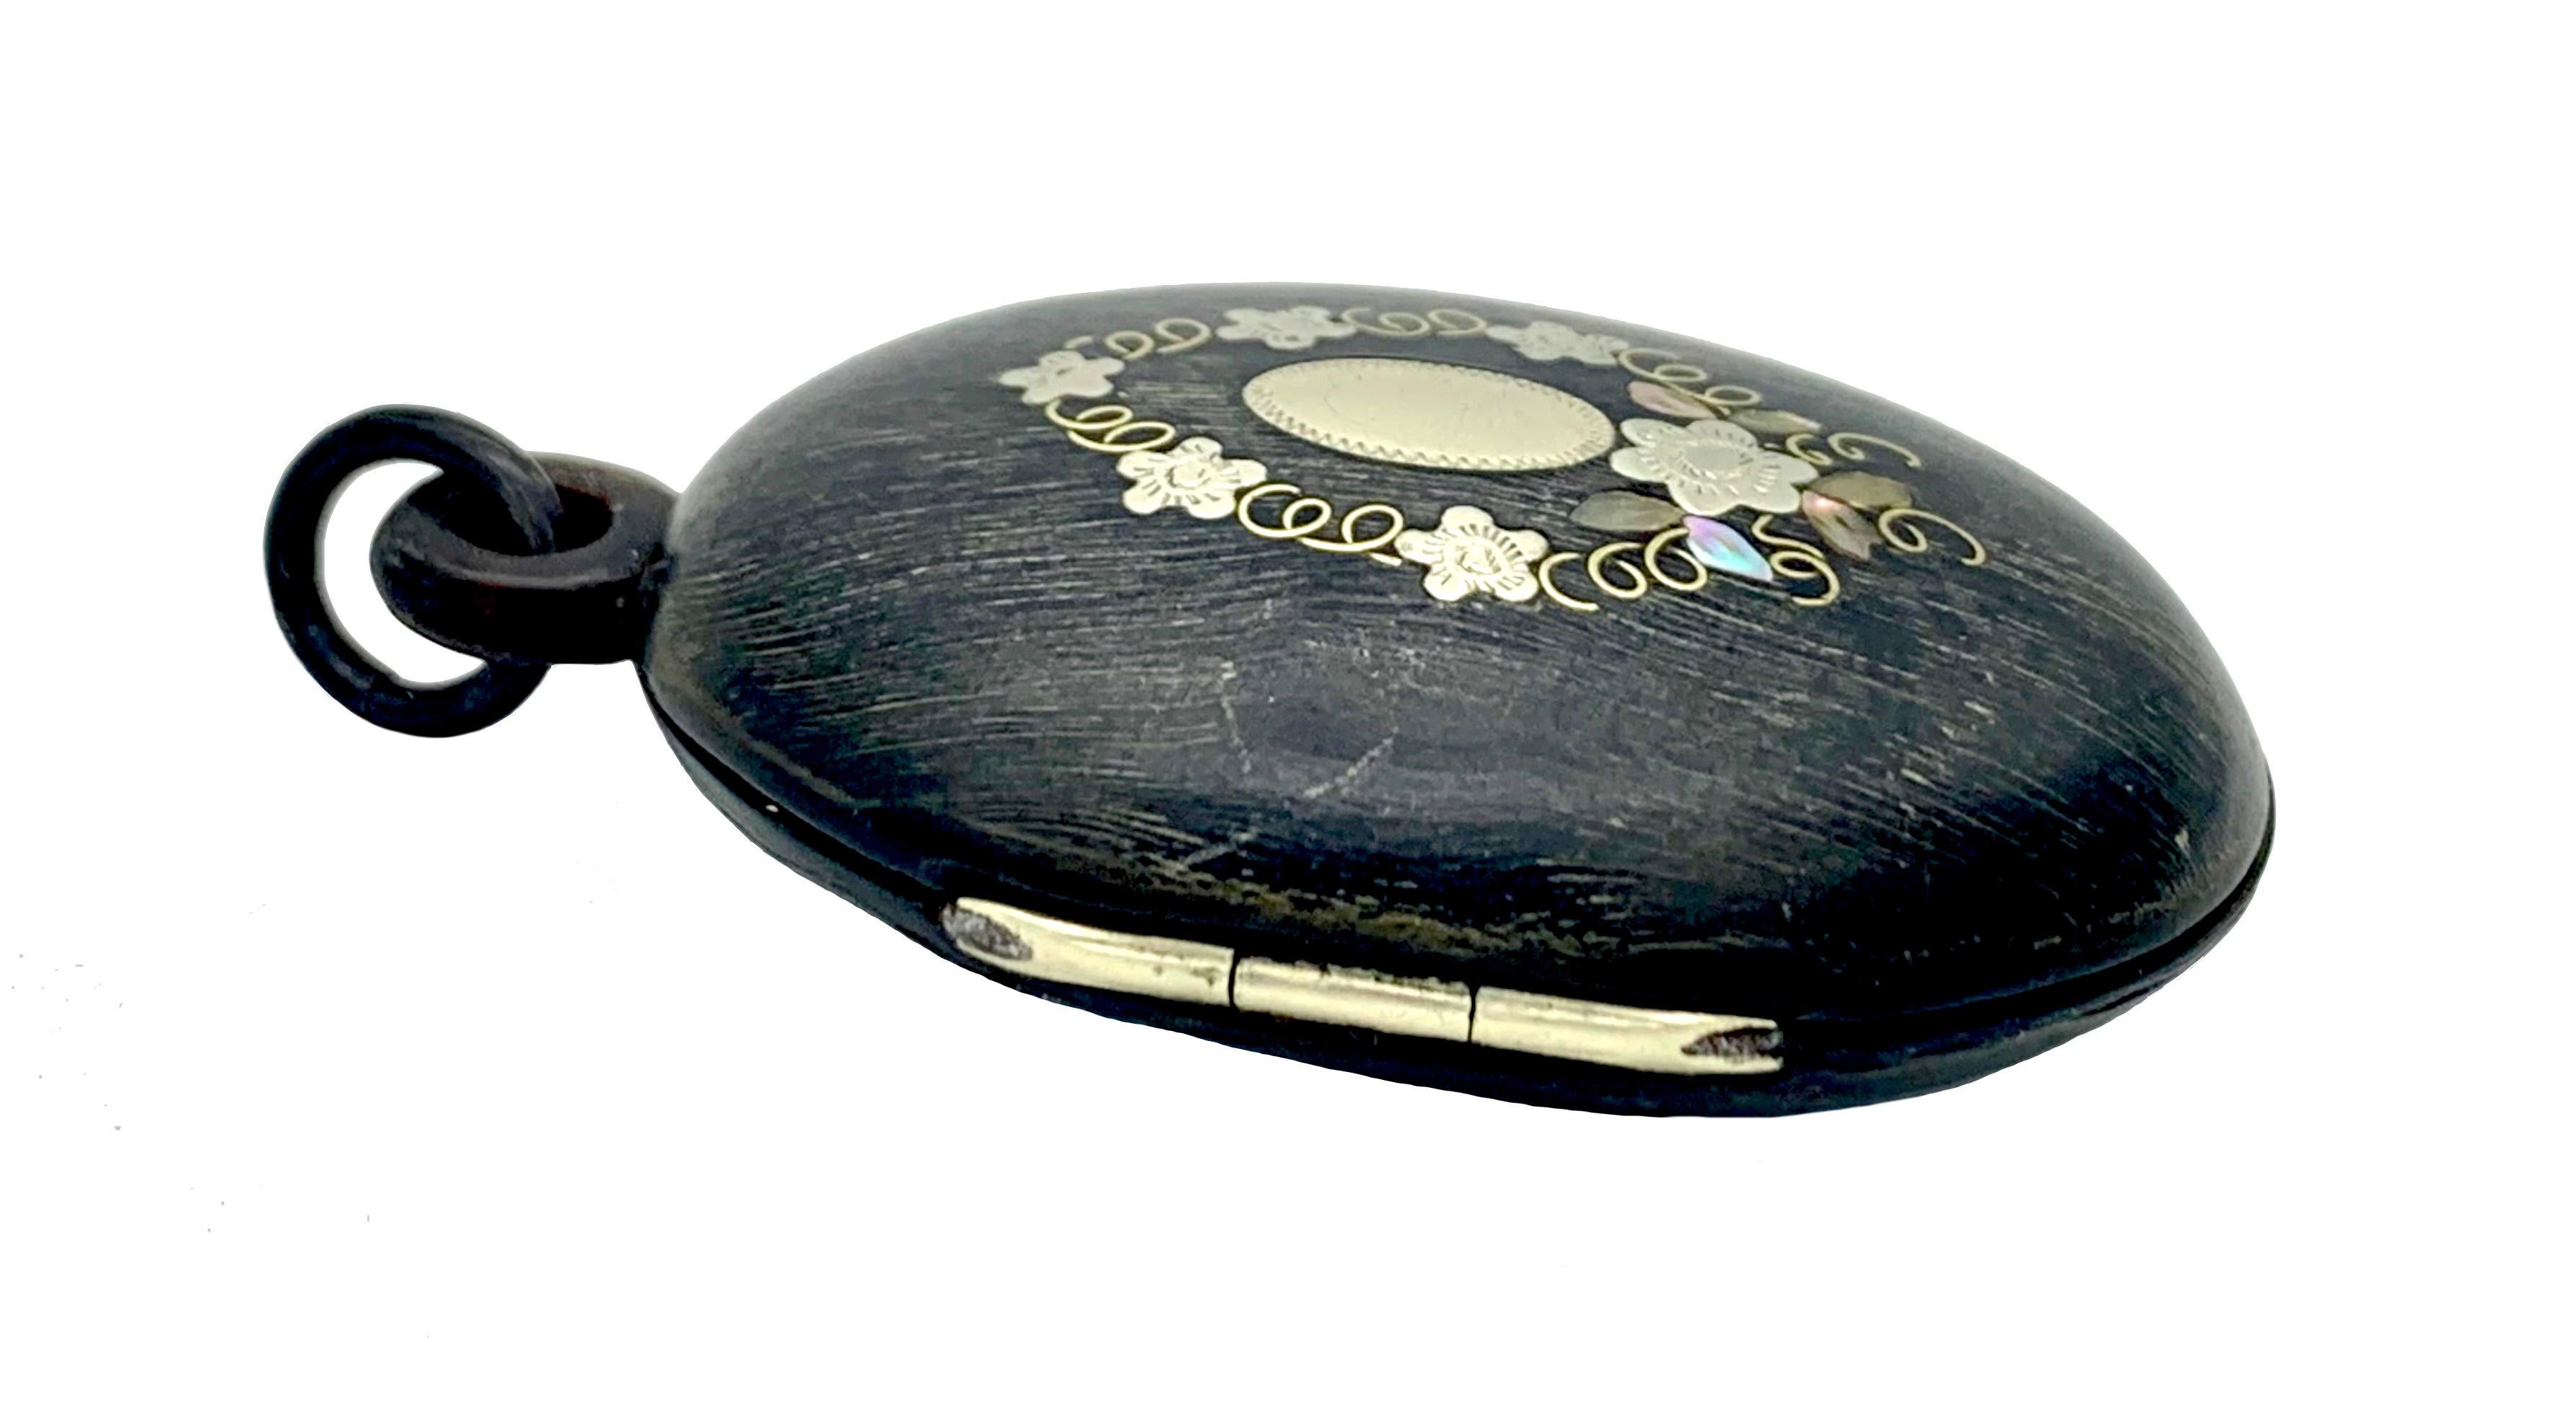 This good size locket has been handcrafted around 1880 out of horn. The front shows fine lines typical for horn. Surrounded by fine lines the locket has been decorated with a flower wreath and an oval plaque. The design is executed in fine inlay